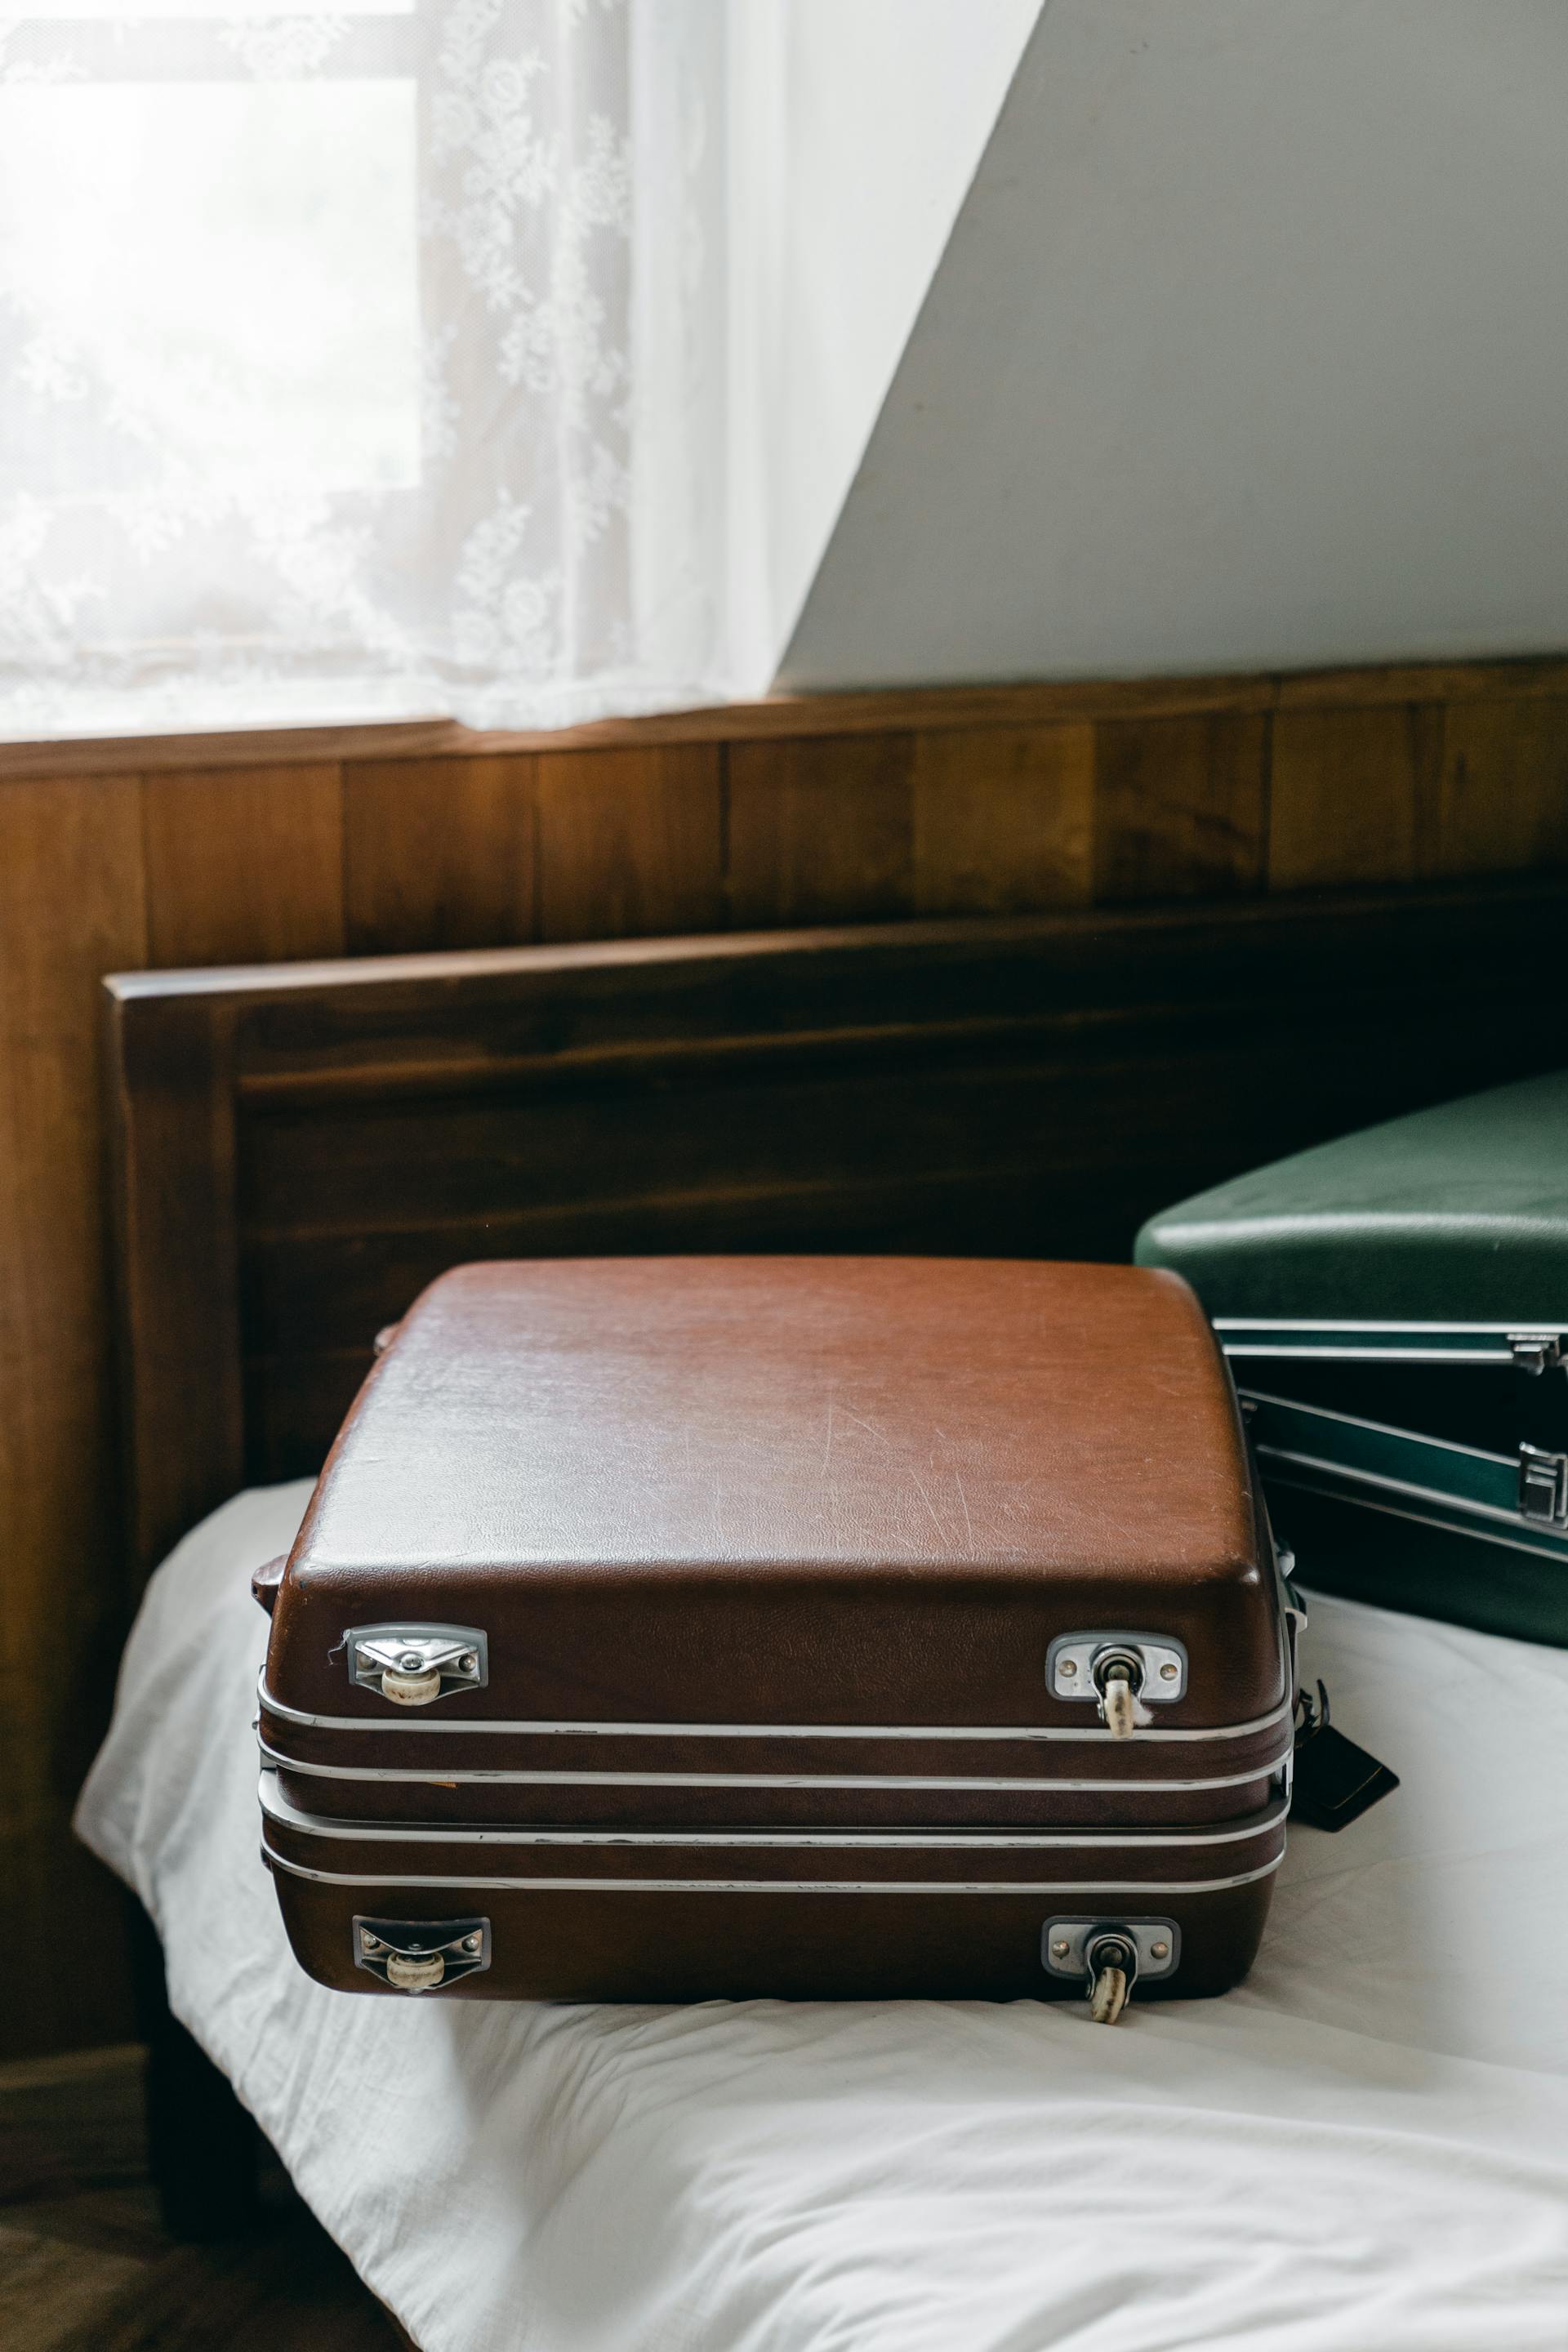 Suitcases on a bed | Source: Pexels